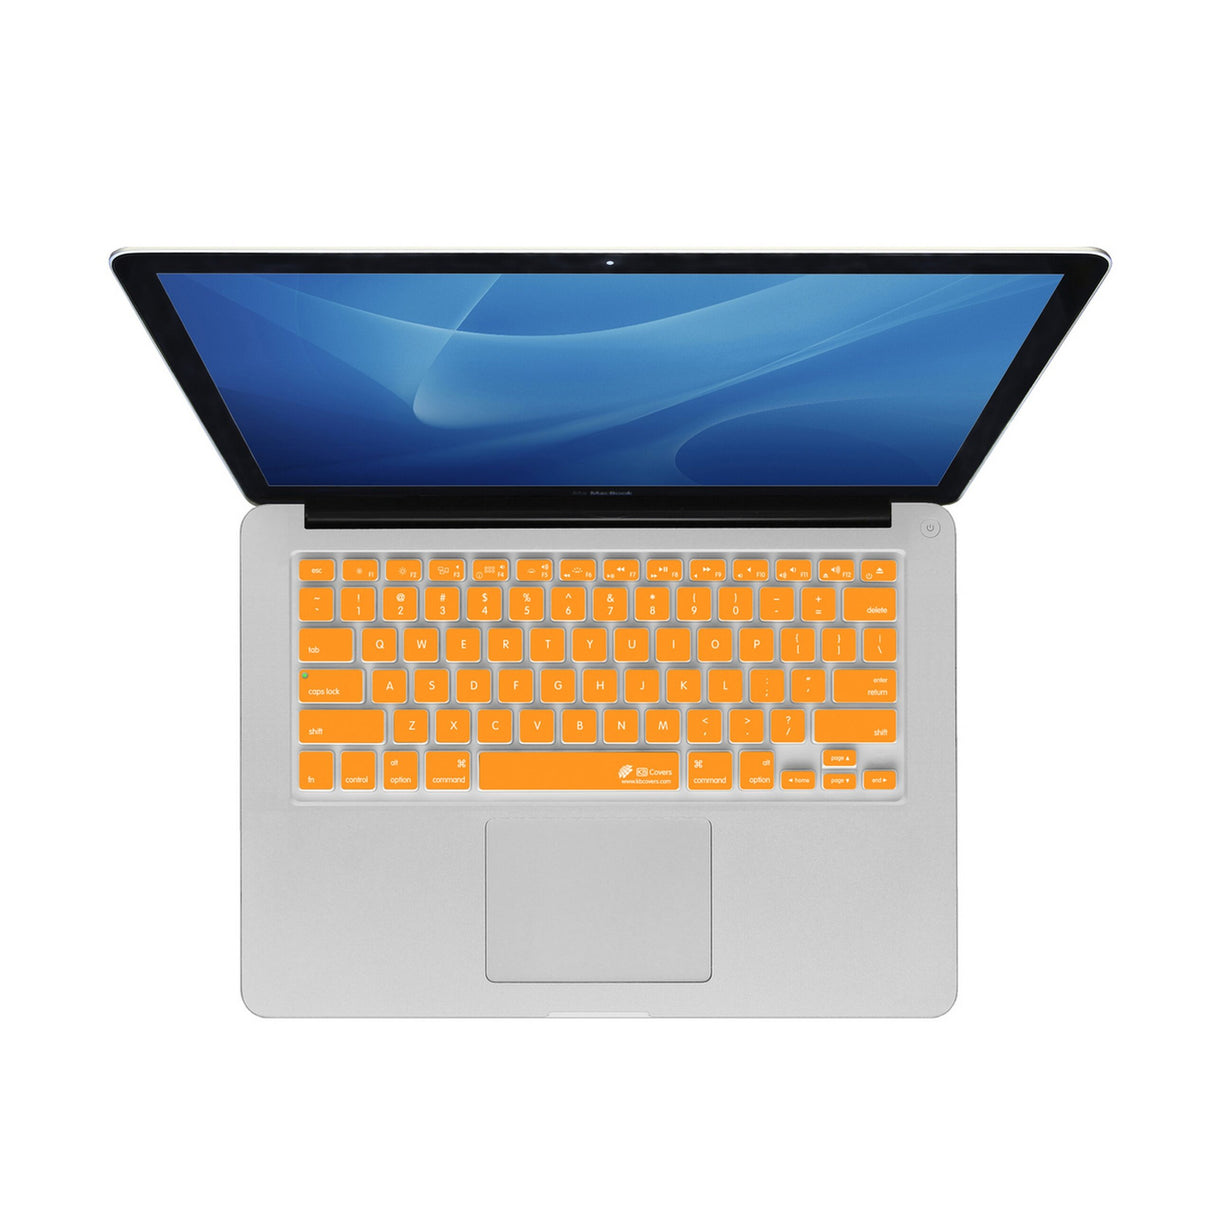 KB Covers CB-M-Orange Orange Keyboard Cover for MacBook/Air 13/Pro 2008+/Retina and Wireless